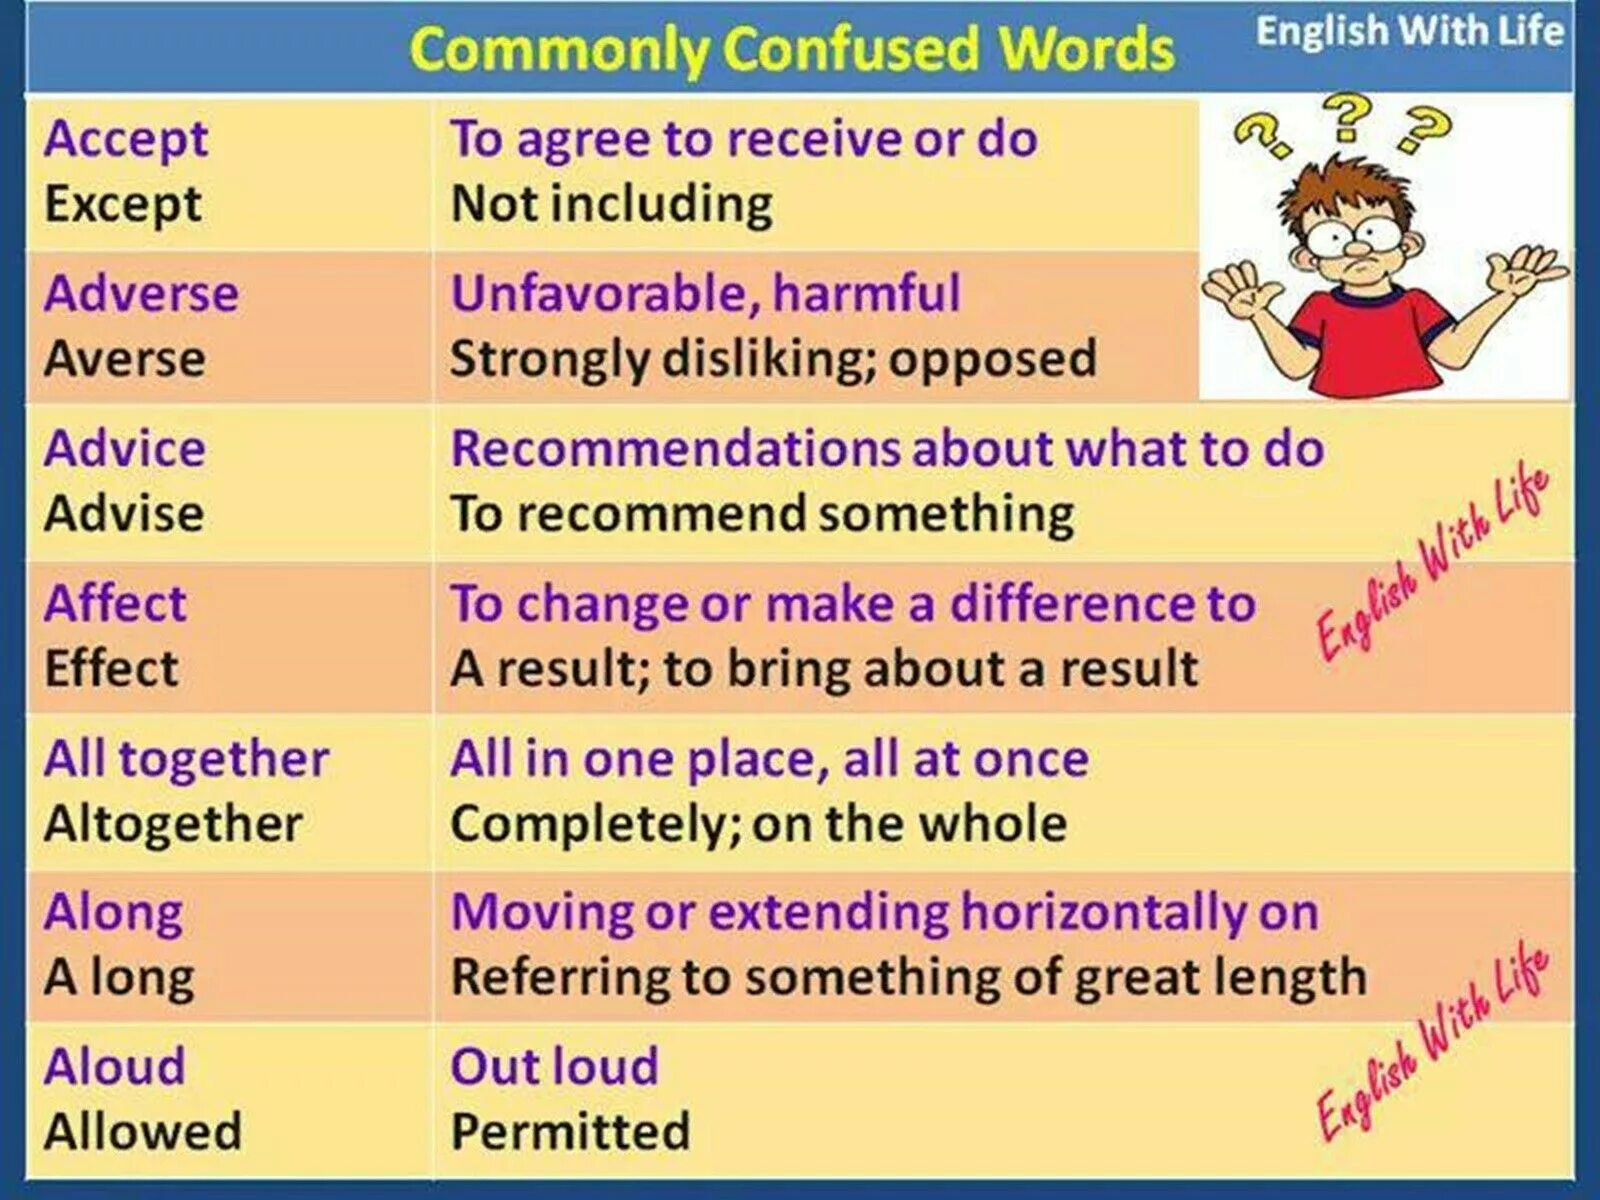 English has about words. Confusing verbs в английском. Confused Words в английском. Commonly confused Words. Words often confused в английском языке.